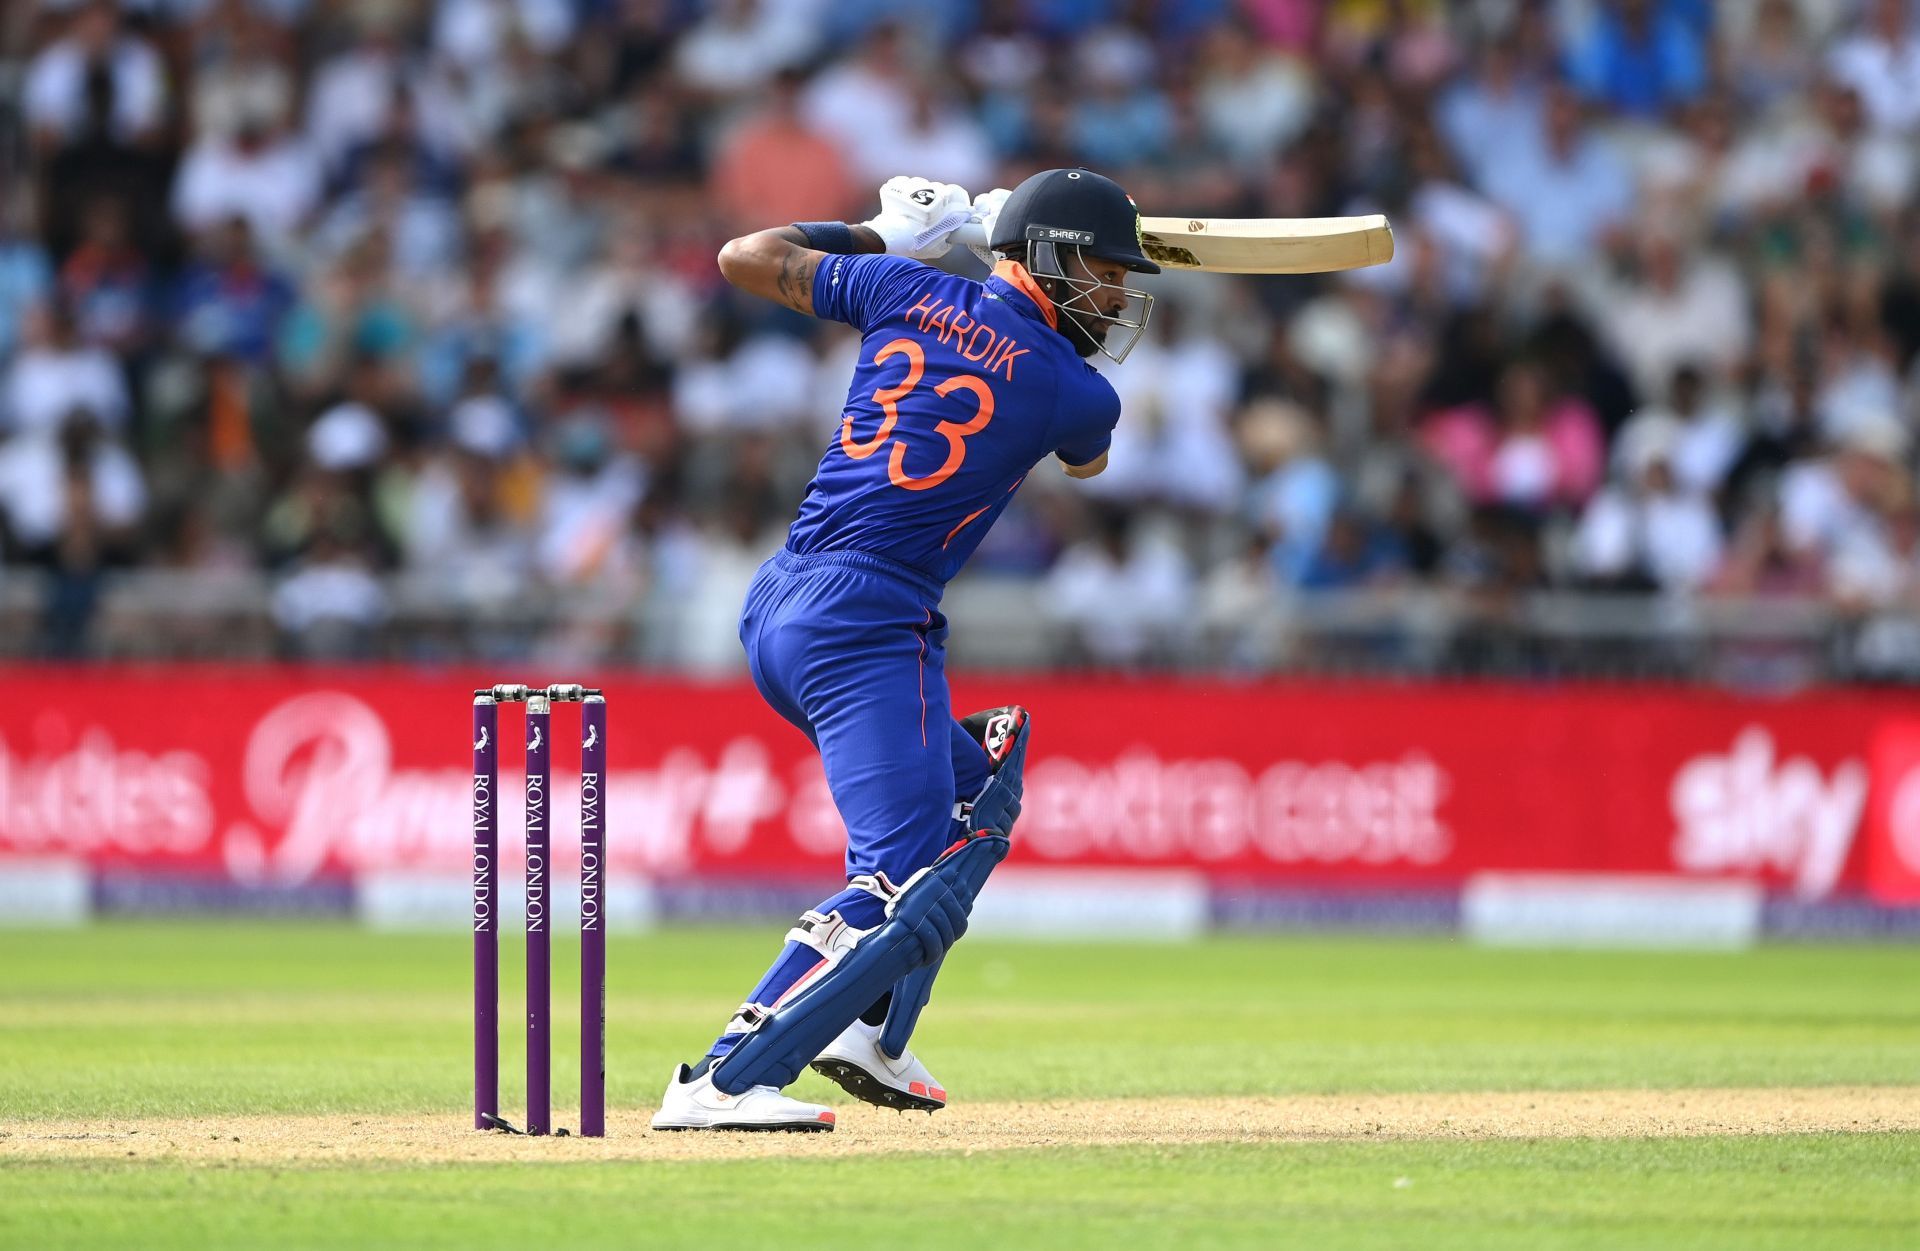 Hardik Pandya is shouldering greater responsibility with the bat